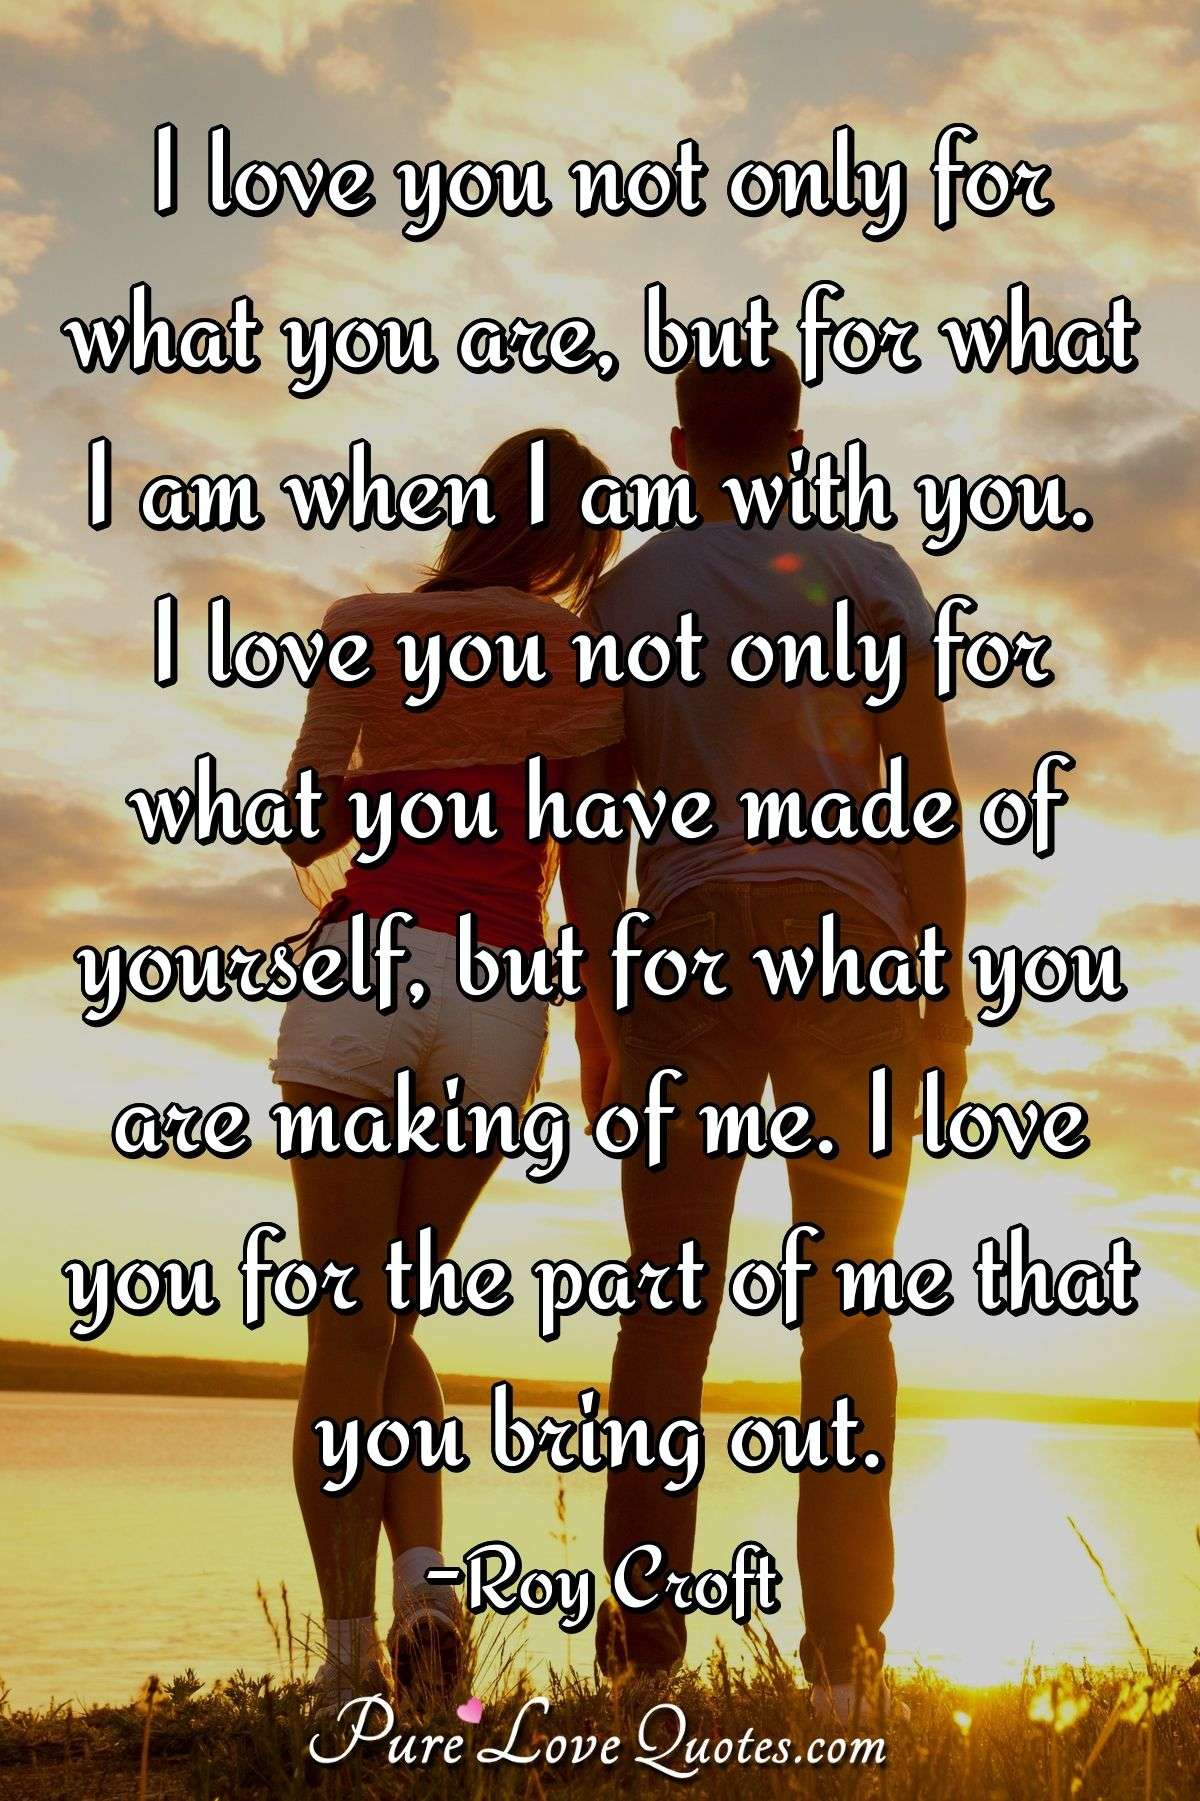 I Love You Not Only For What You Are But For What I Am When I Am With You I Purelovequotes